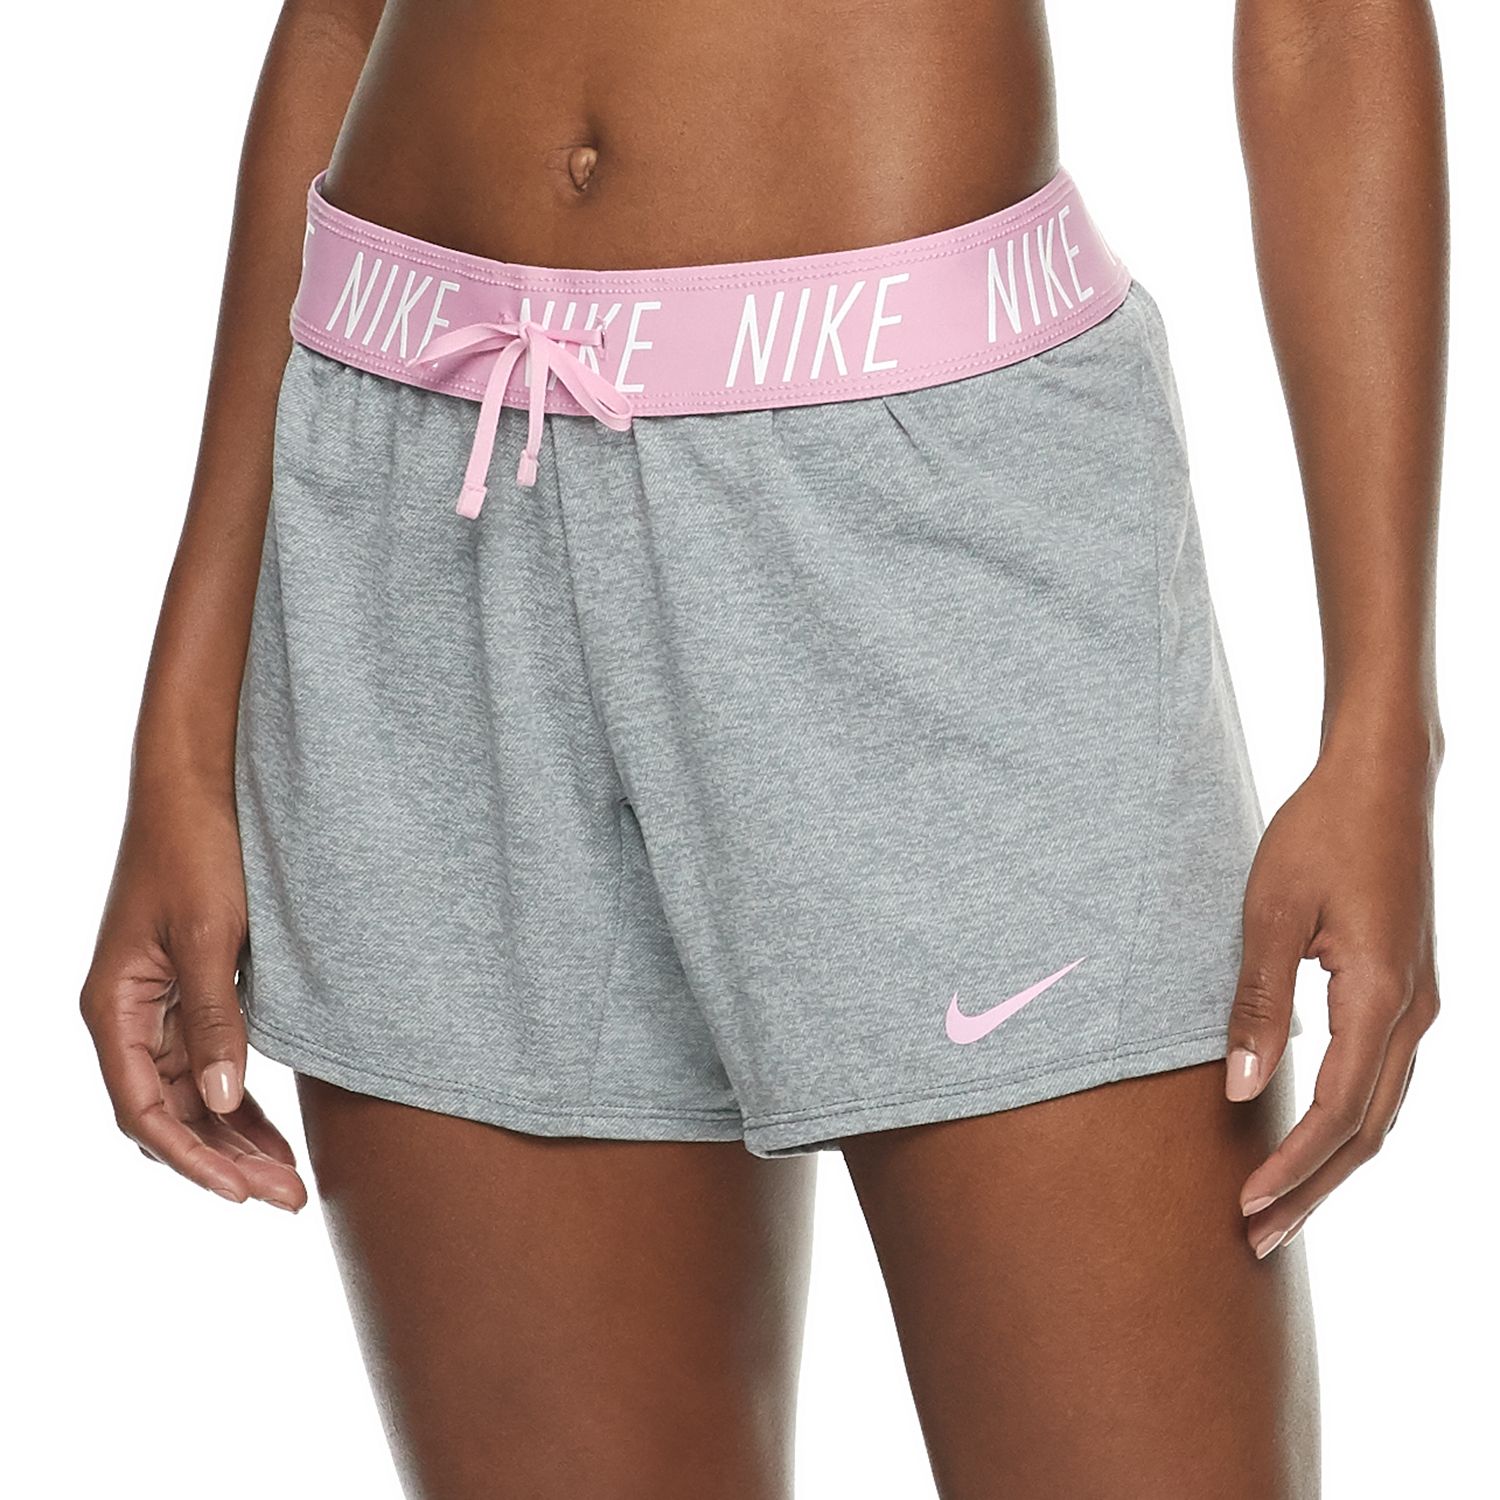 Women's Nike Attack Dry Athletic Shorts